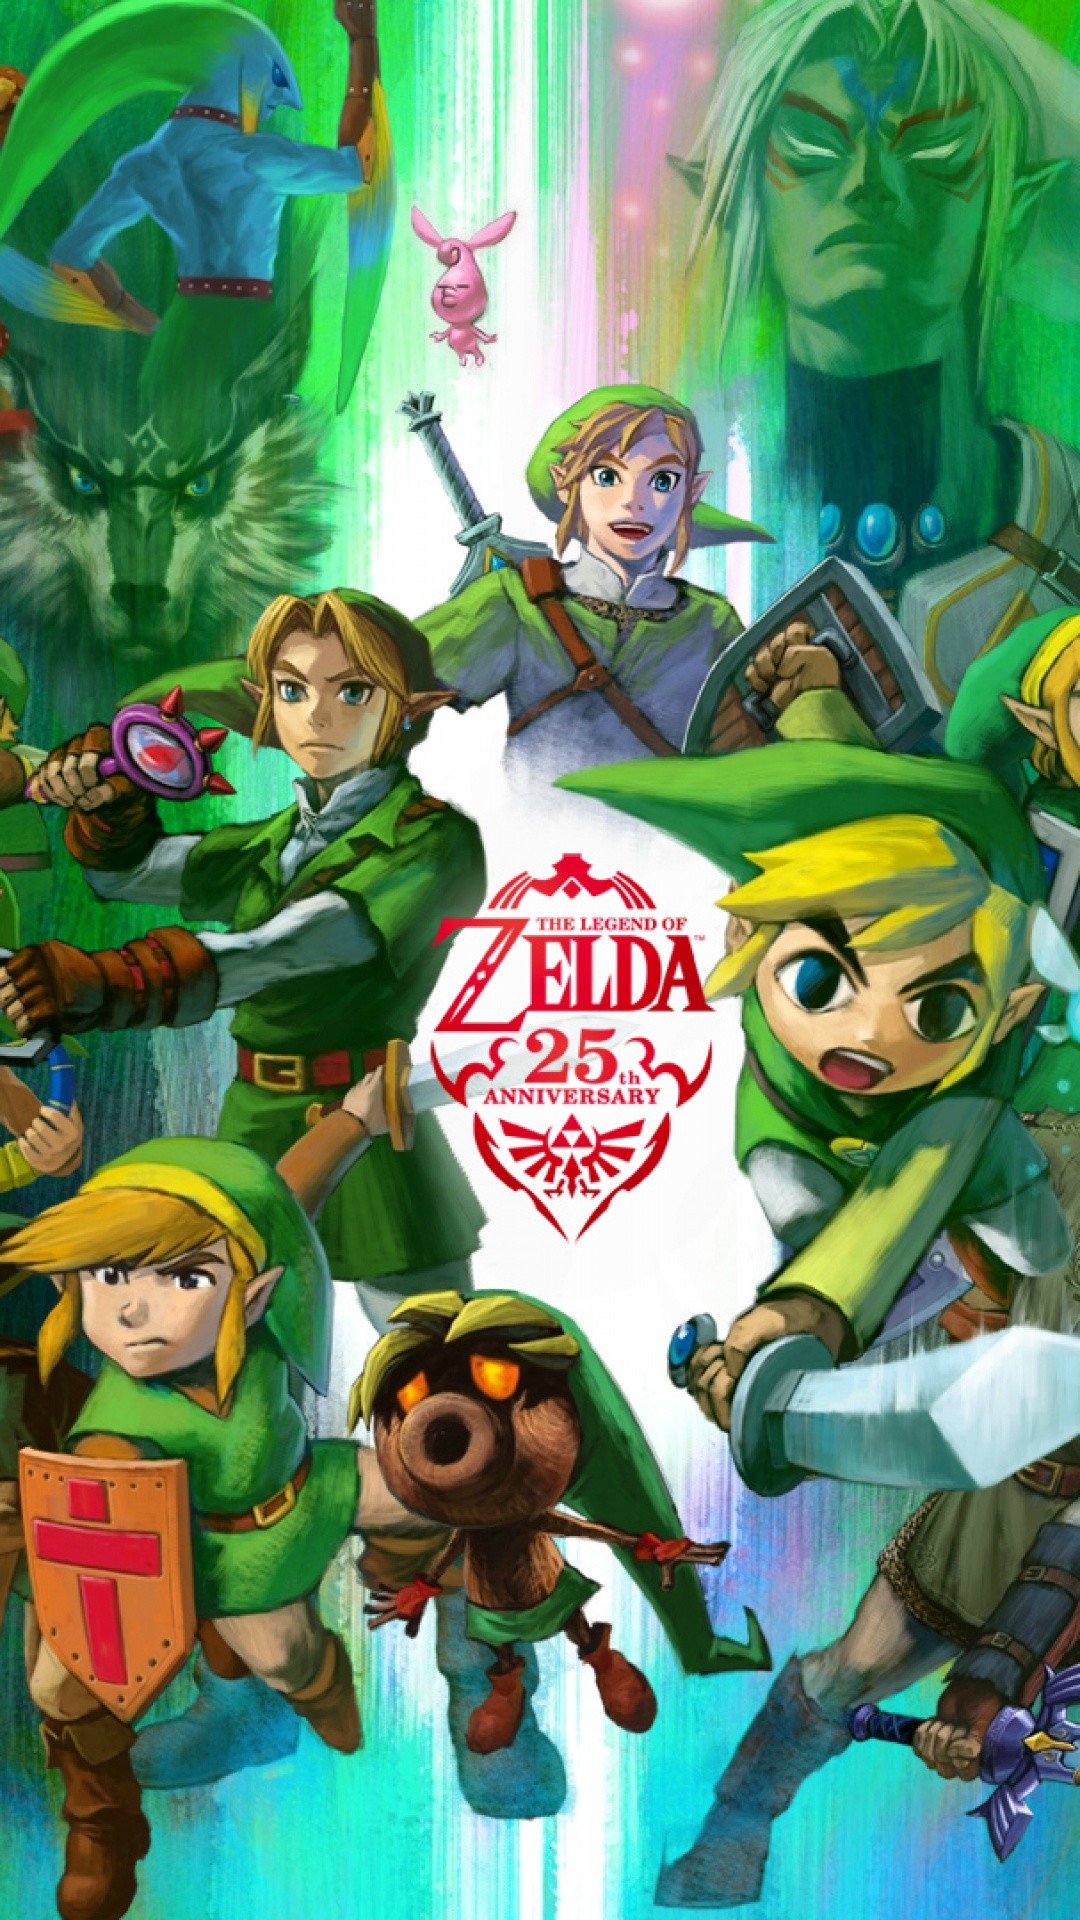 1080x1920 ... The Legend of Zelda Wallpapers for iPhone | iTito Games Blog ...